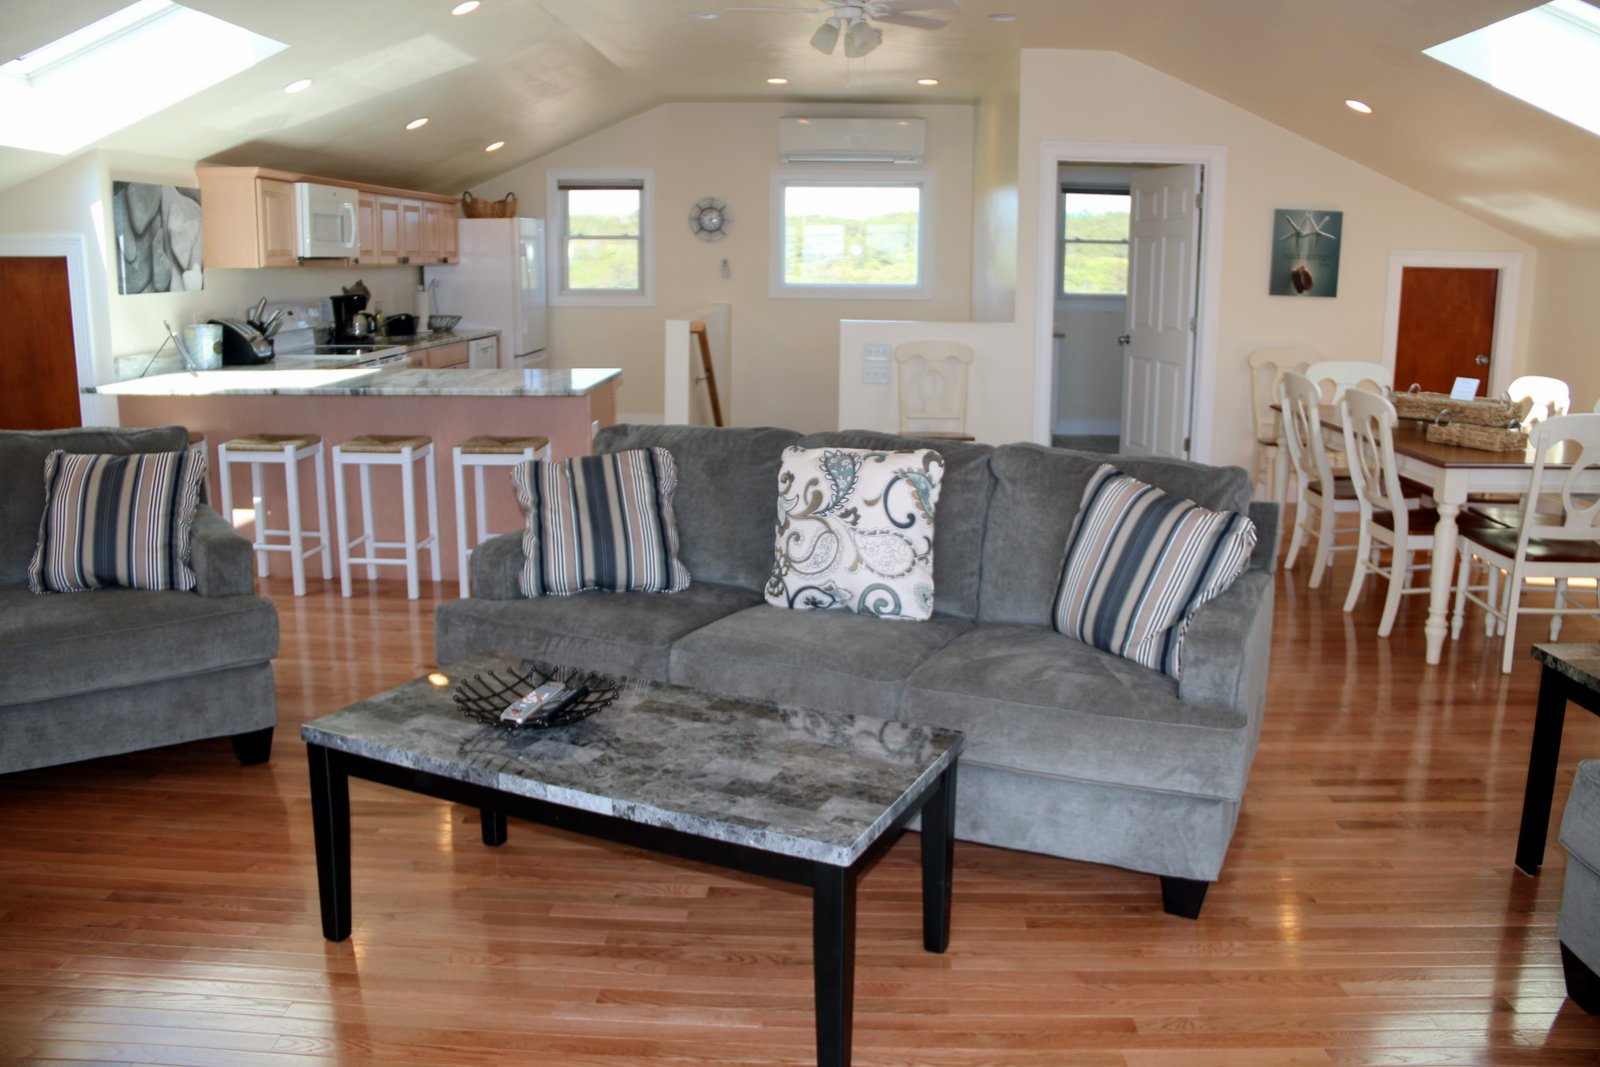 Upstairs Living, Kitchen and Dining of New Shore House